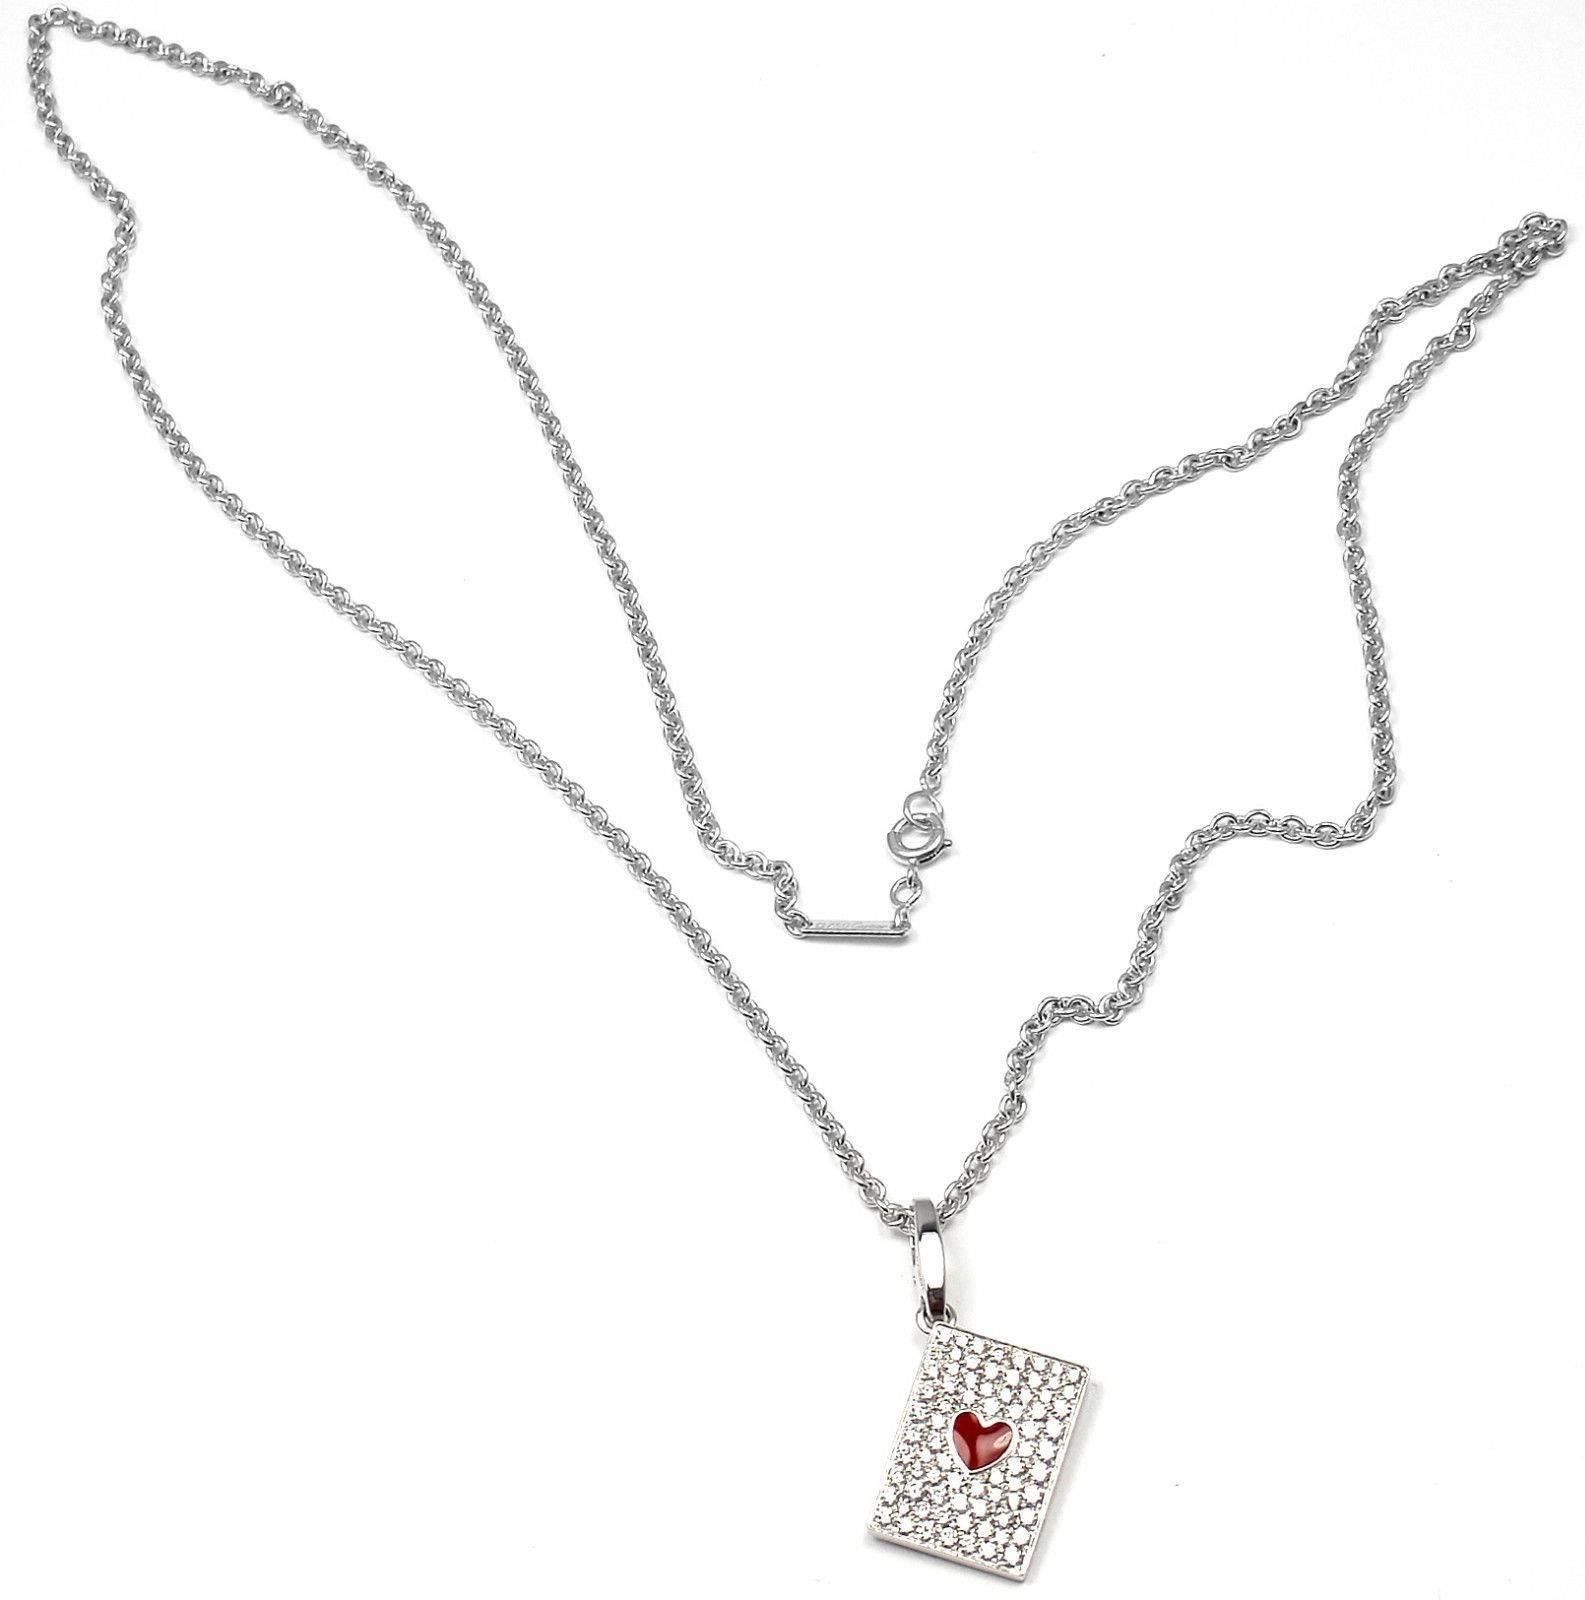 18k White Gold Diamond Ace Of Hearts Card Pendant Necklace by Cartier. 
This necklace comes with an original Cartier box. 
With 90 round brilliant cut diamonds VVS1 clarity, E color total weight approx. 1.5ct
** This pendant is very rare it is